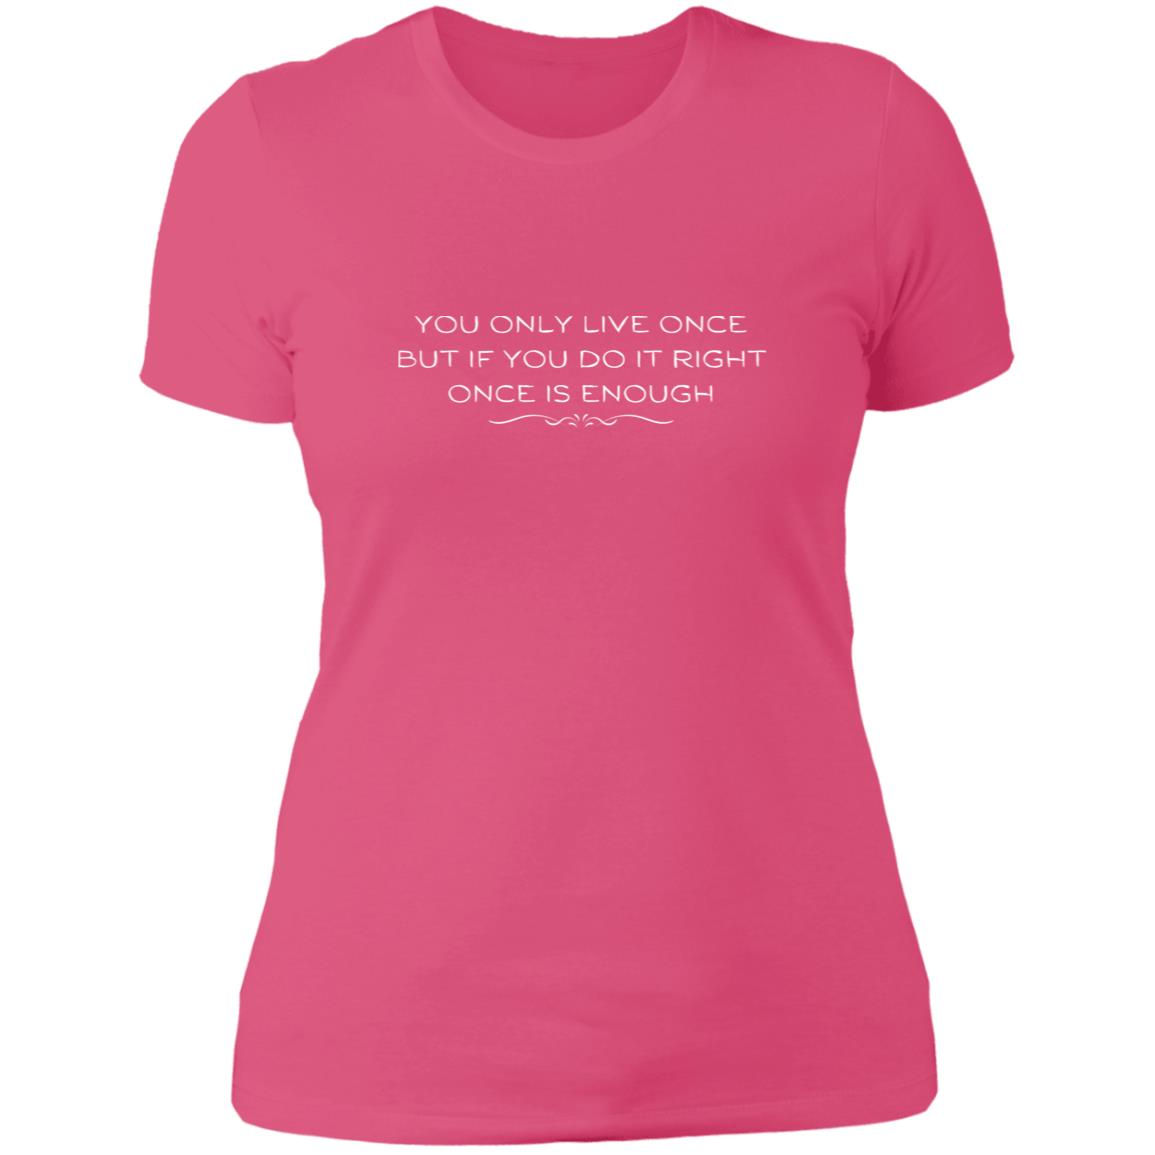 Once is enough - women's